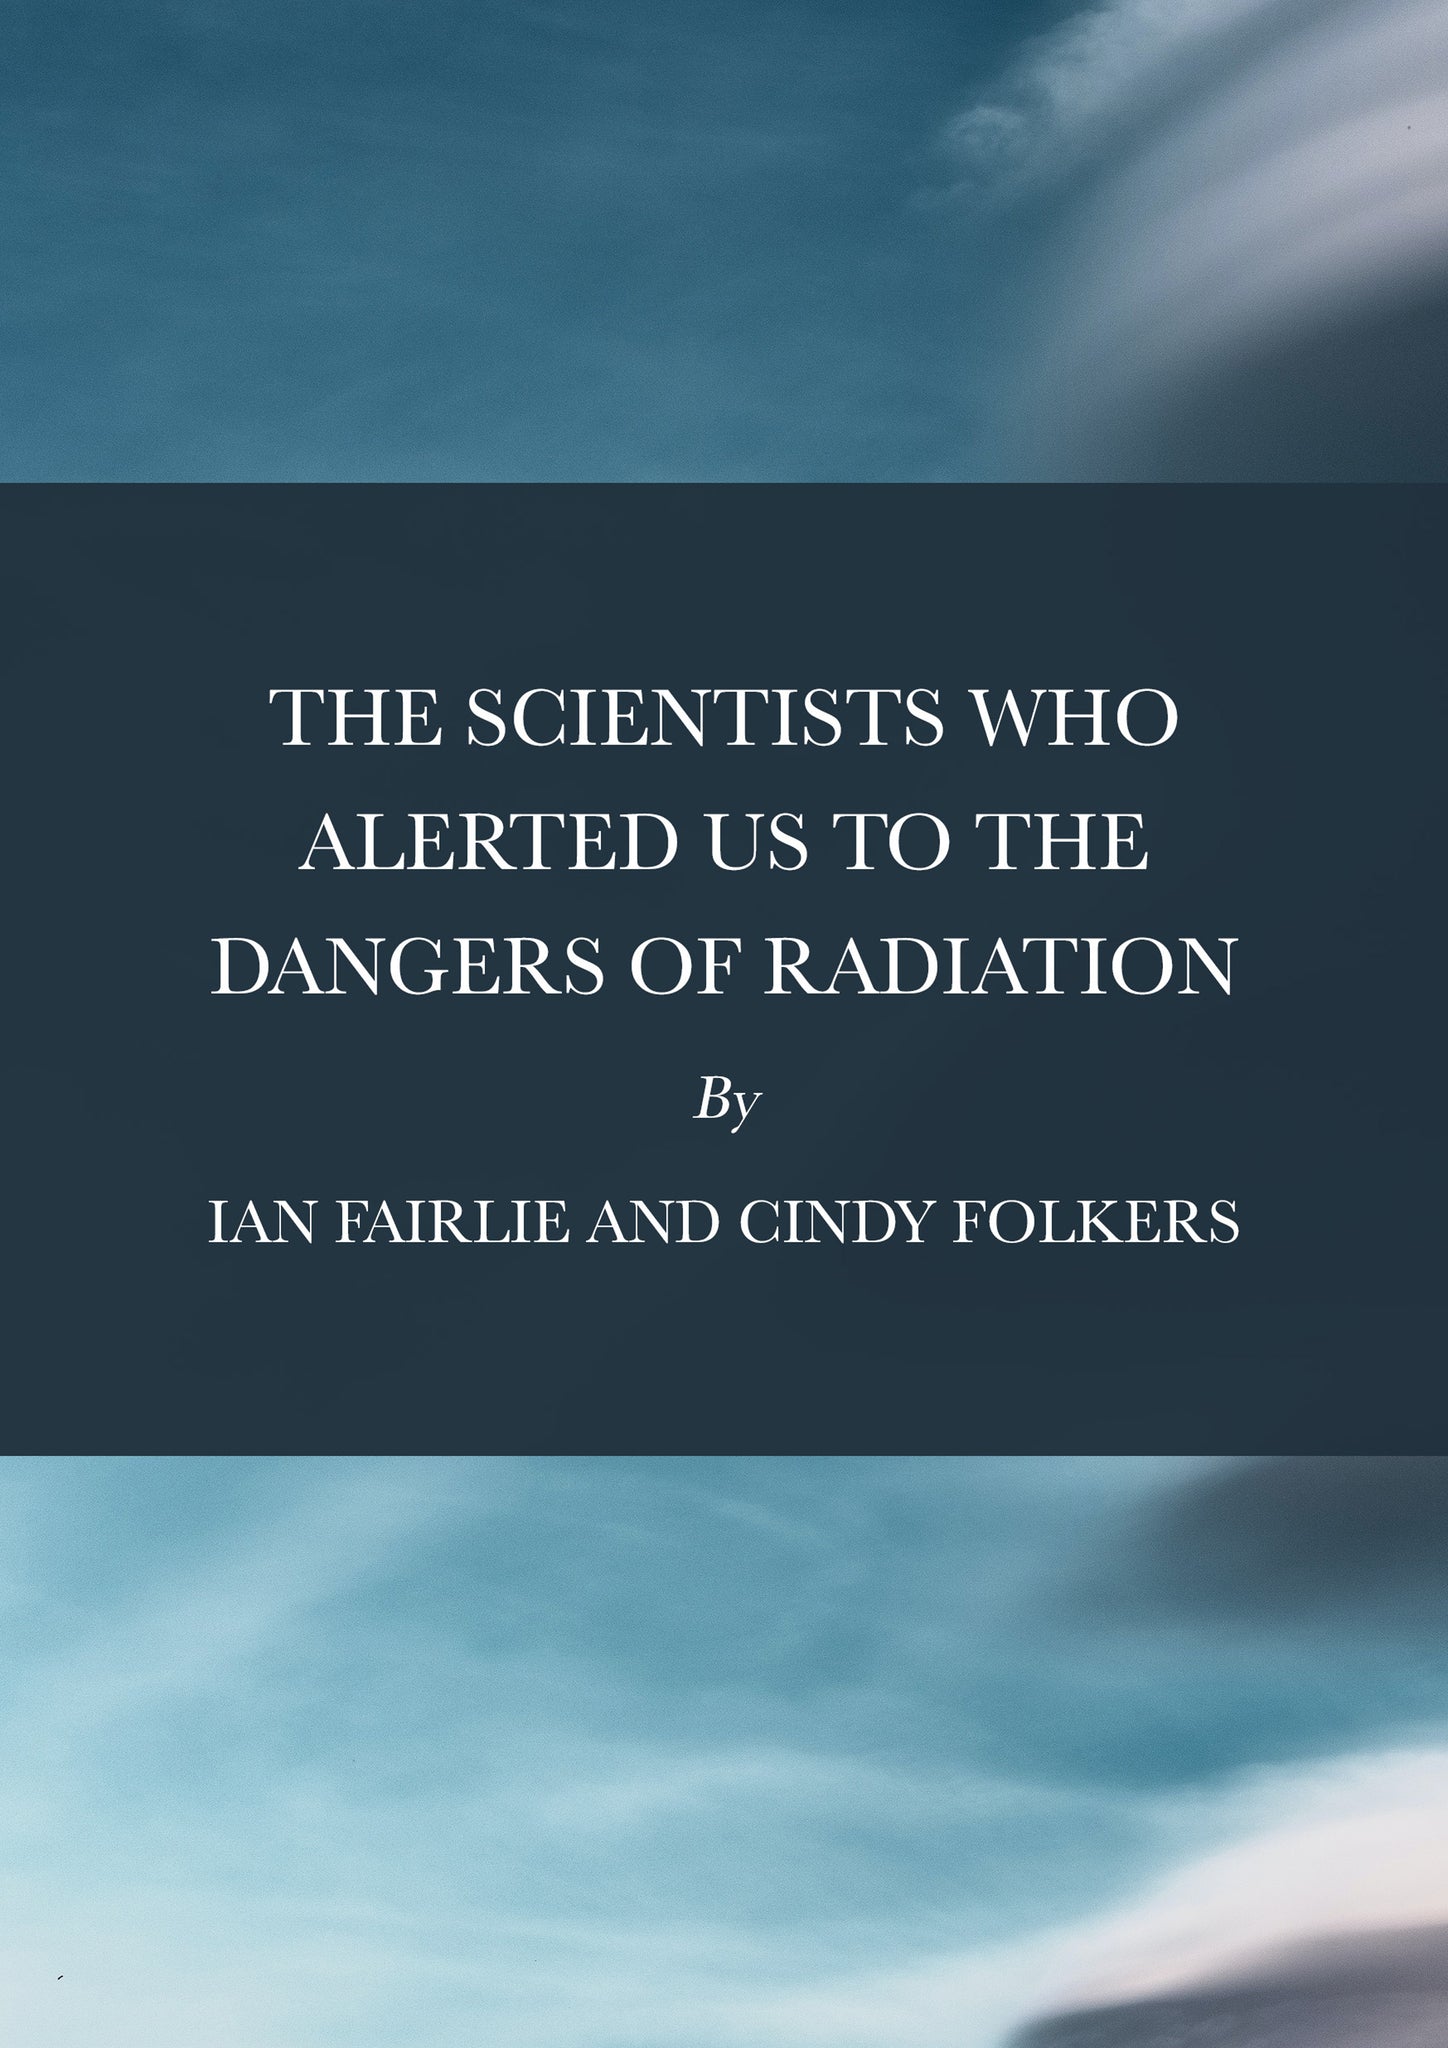 The Scientists Who Alerted Us to the Dangers of Radiation